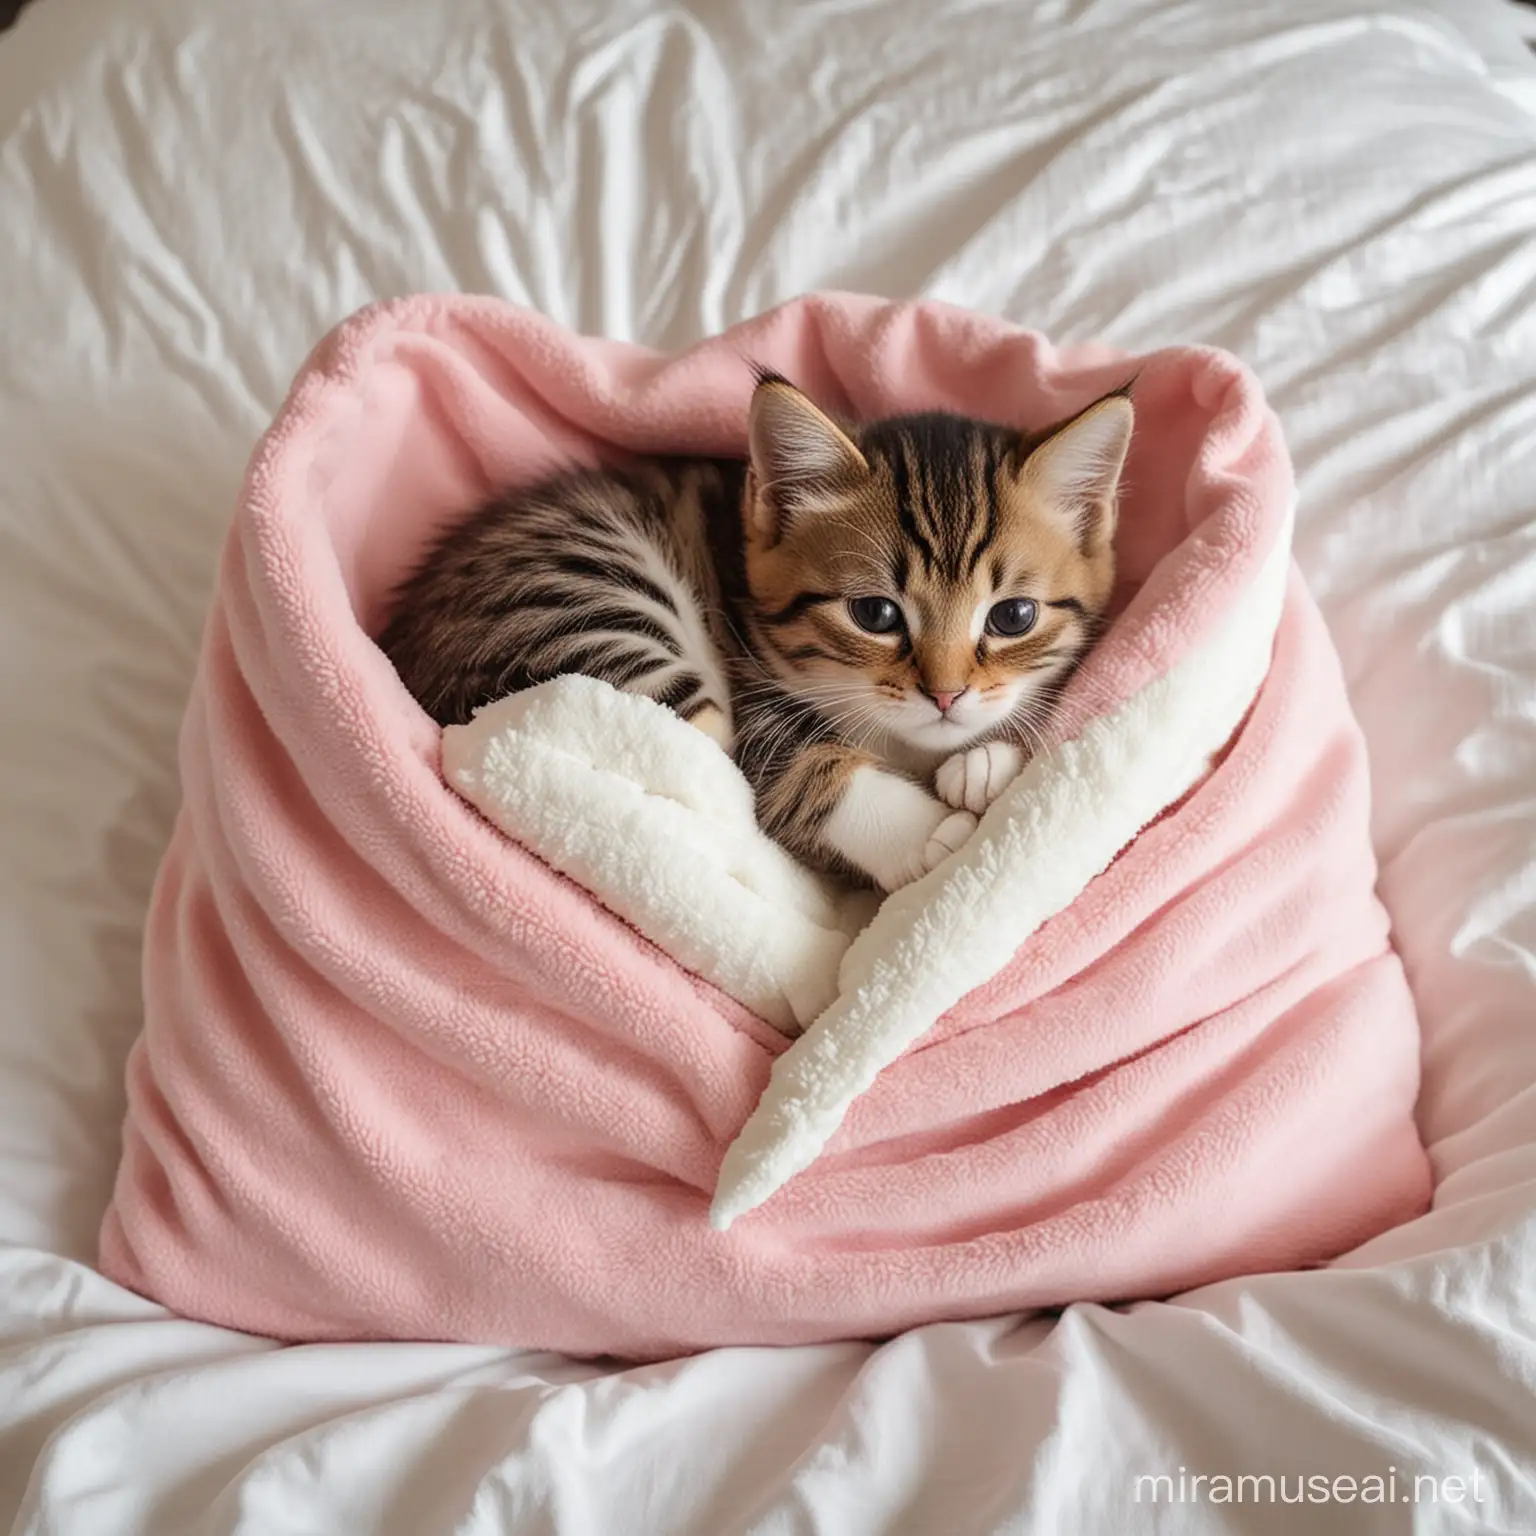 Adorable Baby Cat Sleeping Peacefully in Bed with Warm Blankets